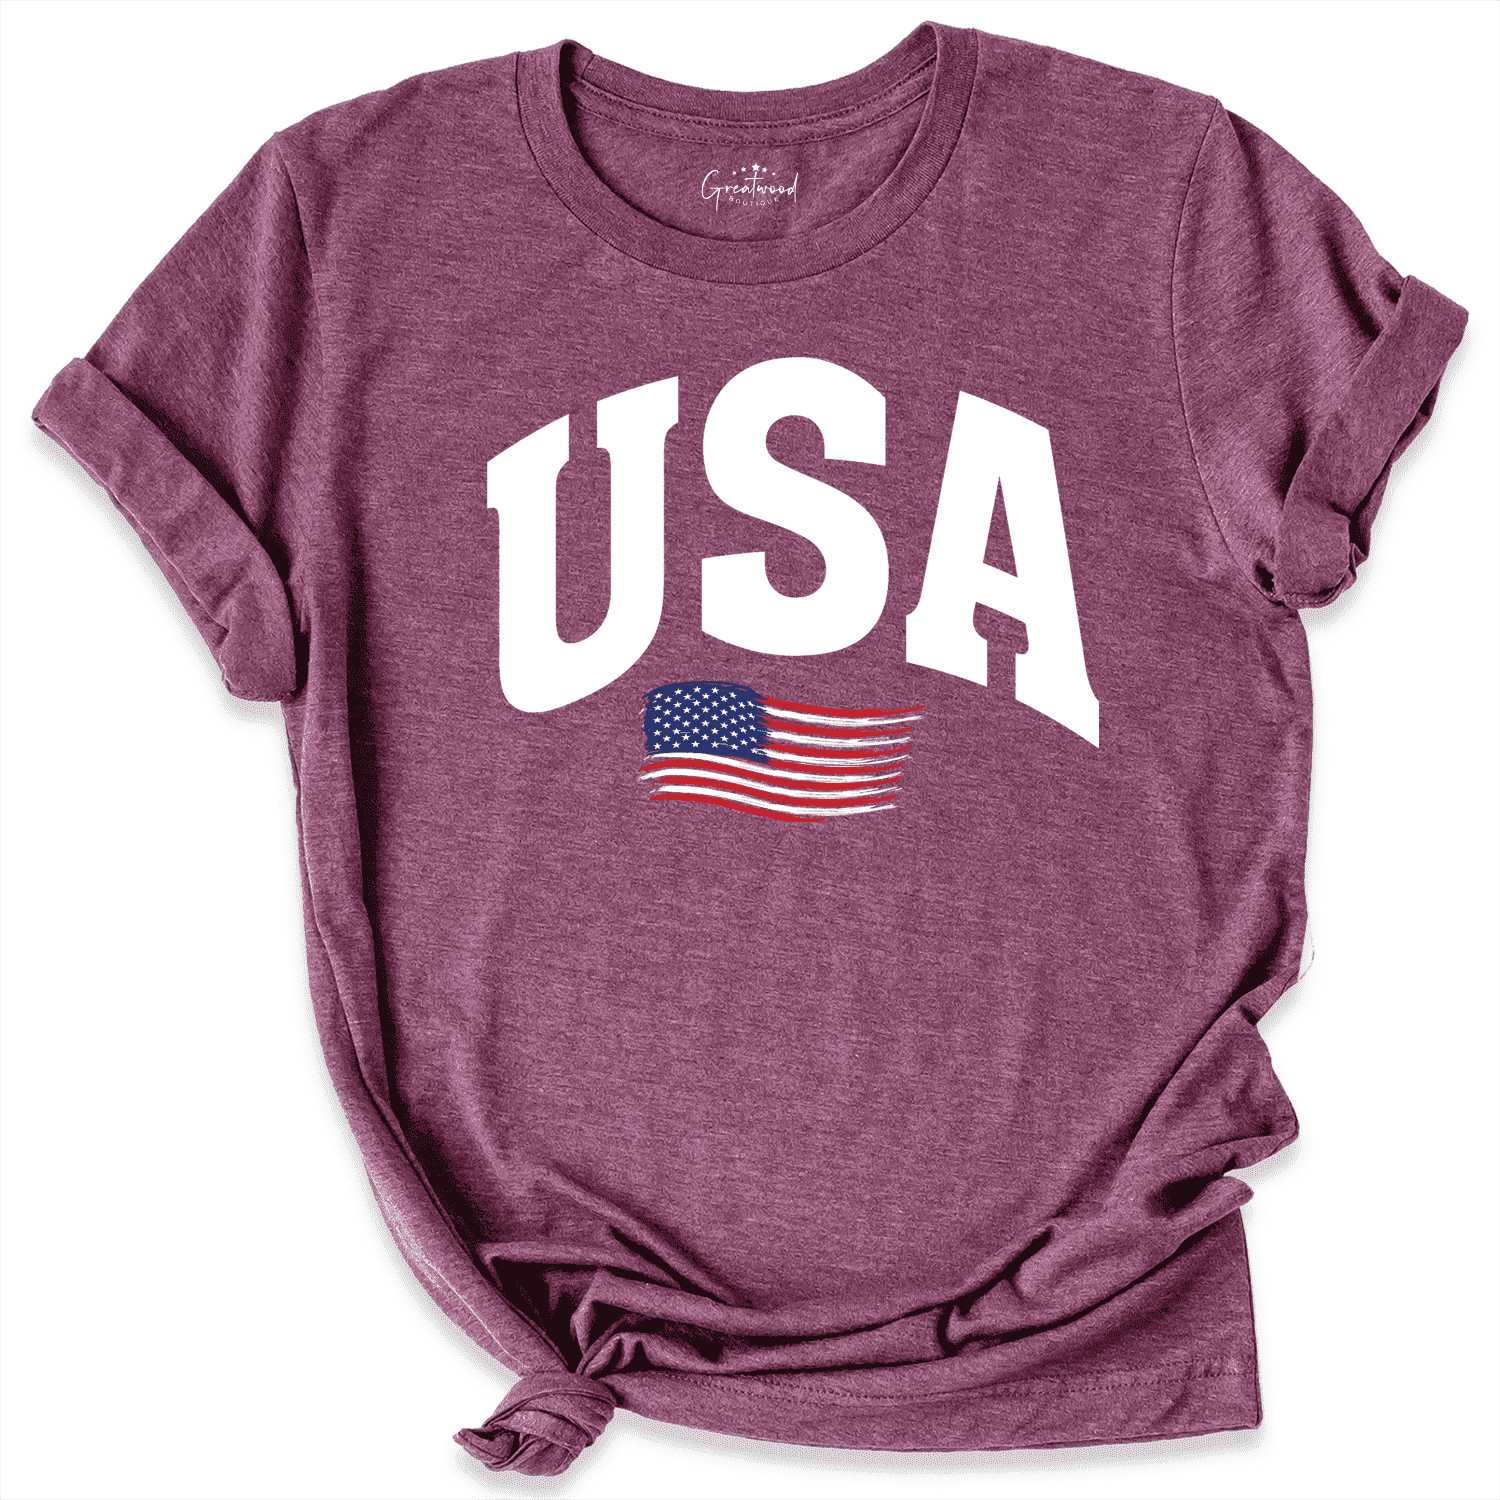 USA Flag Shirt Maroon - Greatwood Boutique